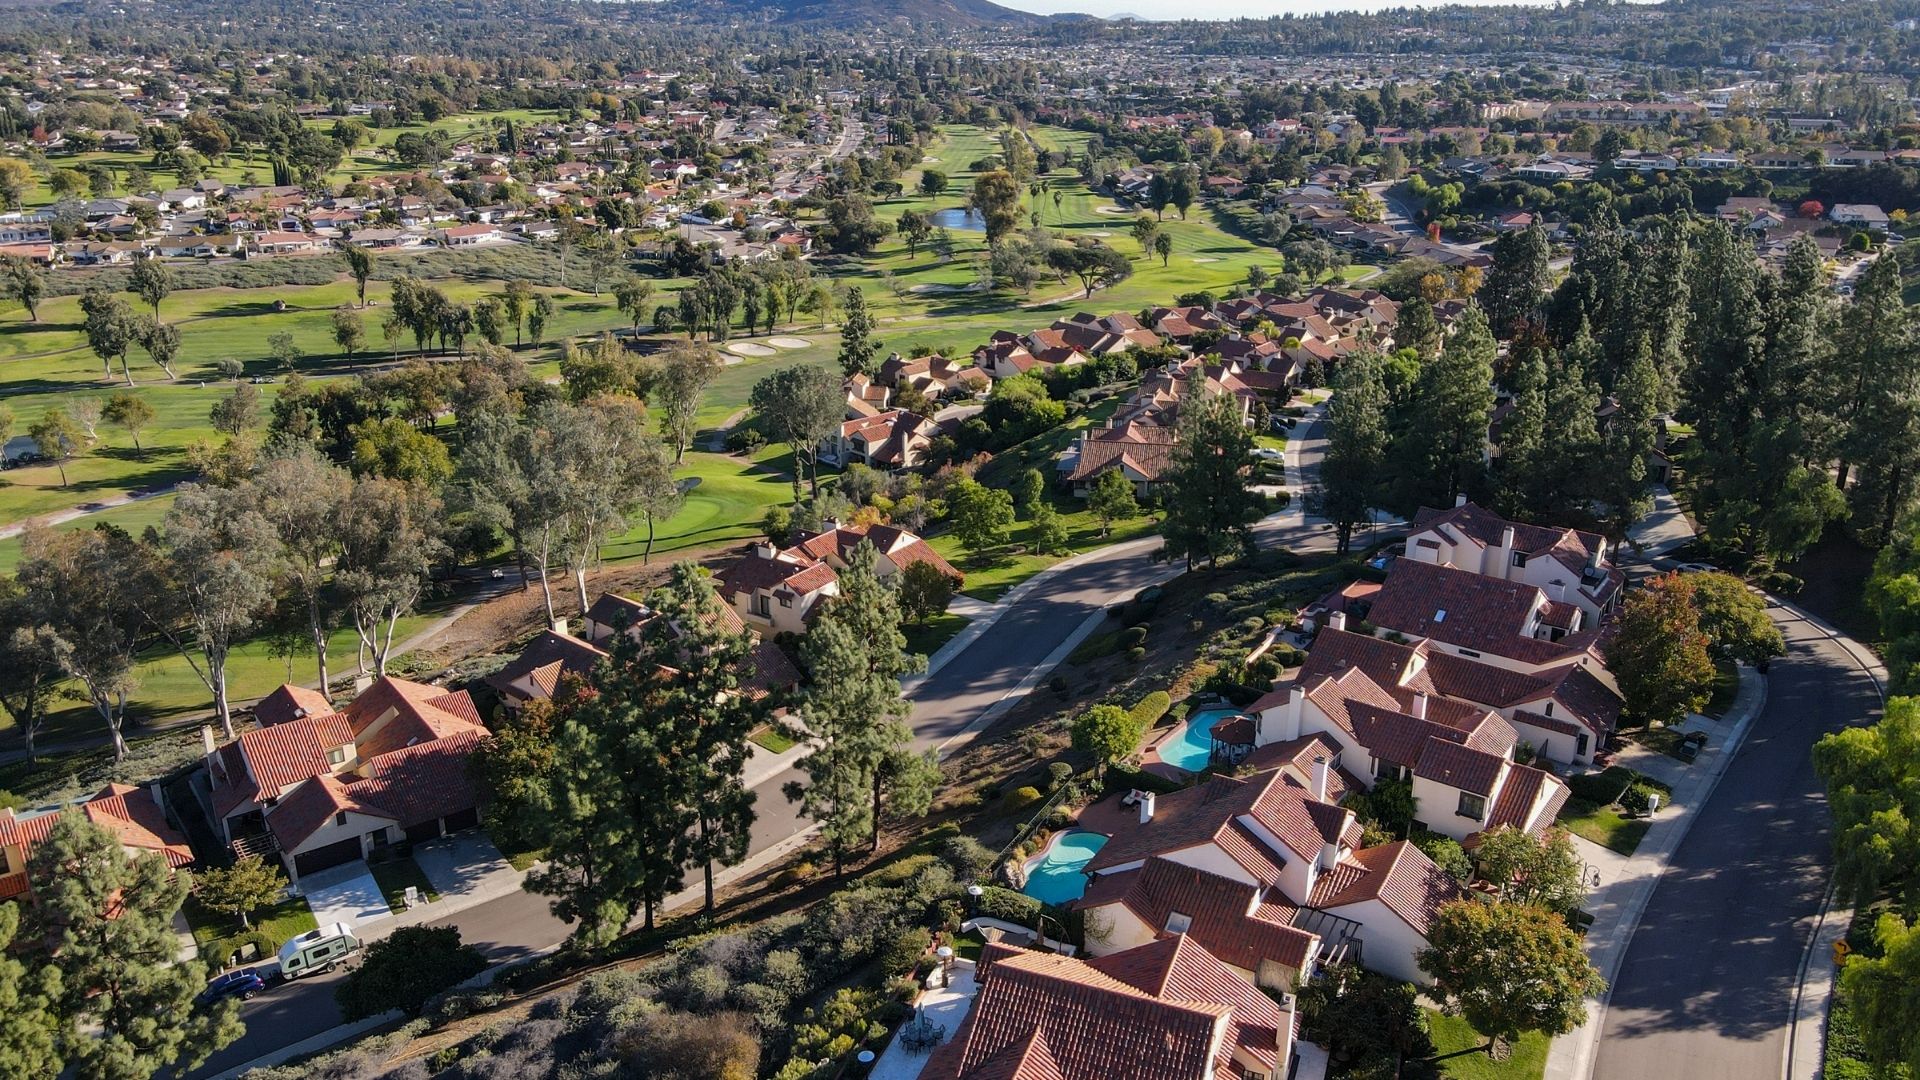 Rancho Bernardo Aerial View showing tree diversity and Golf Course